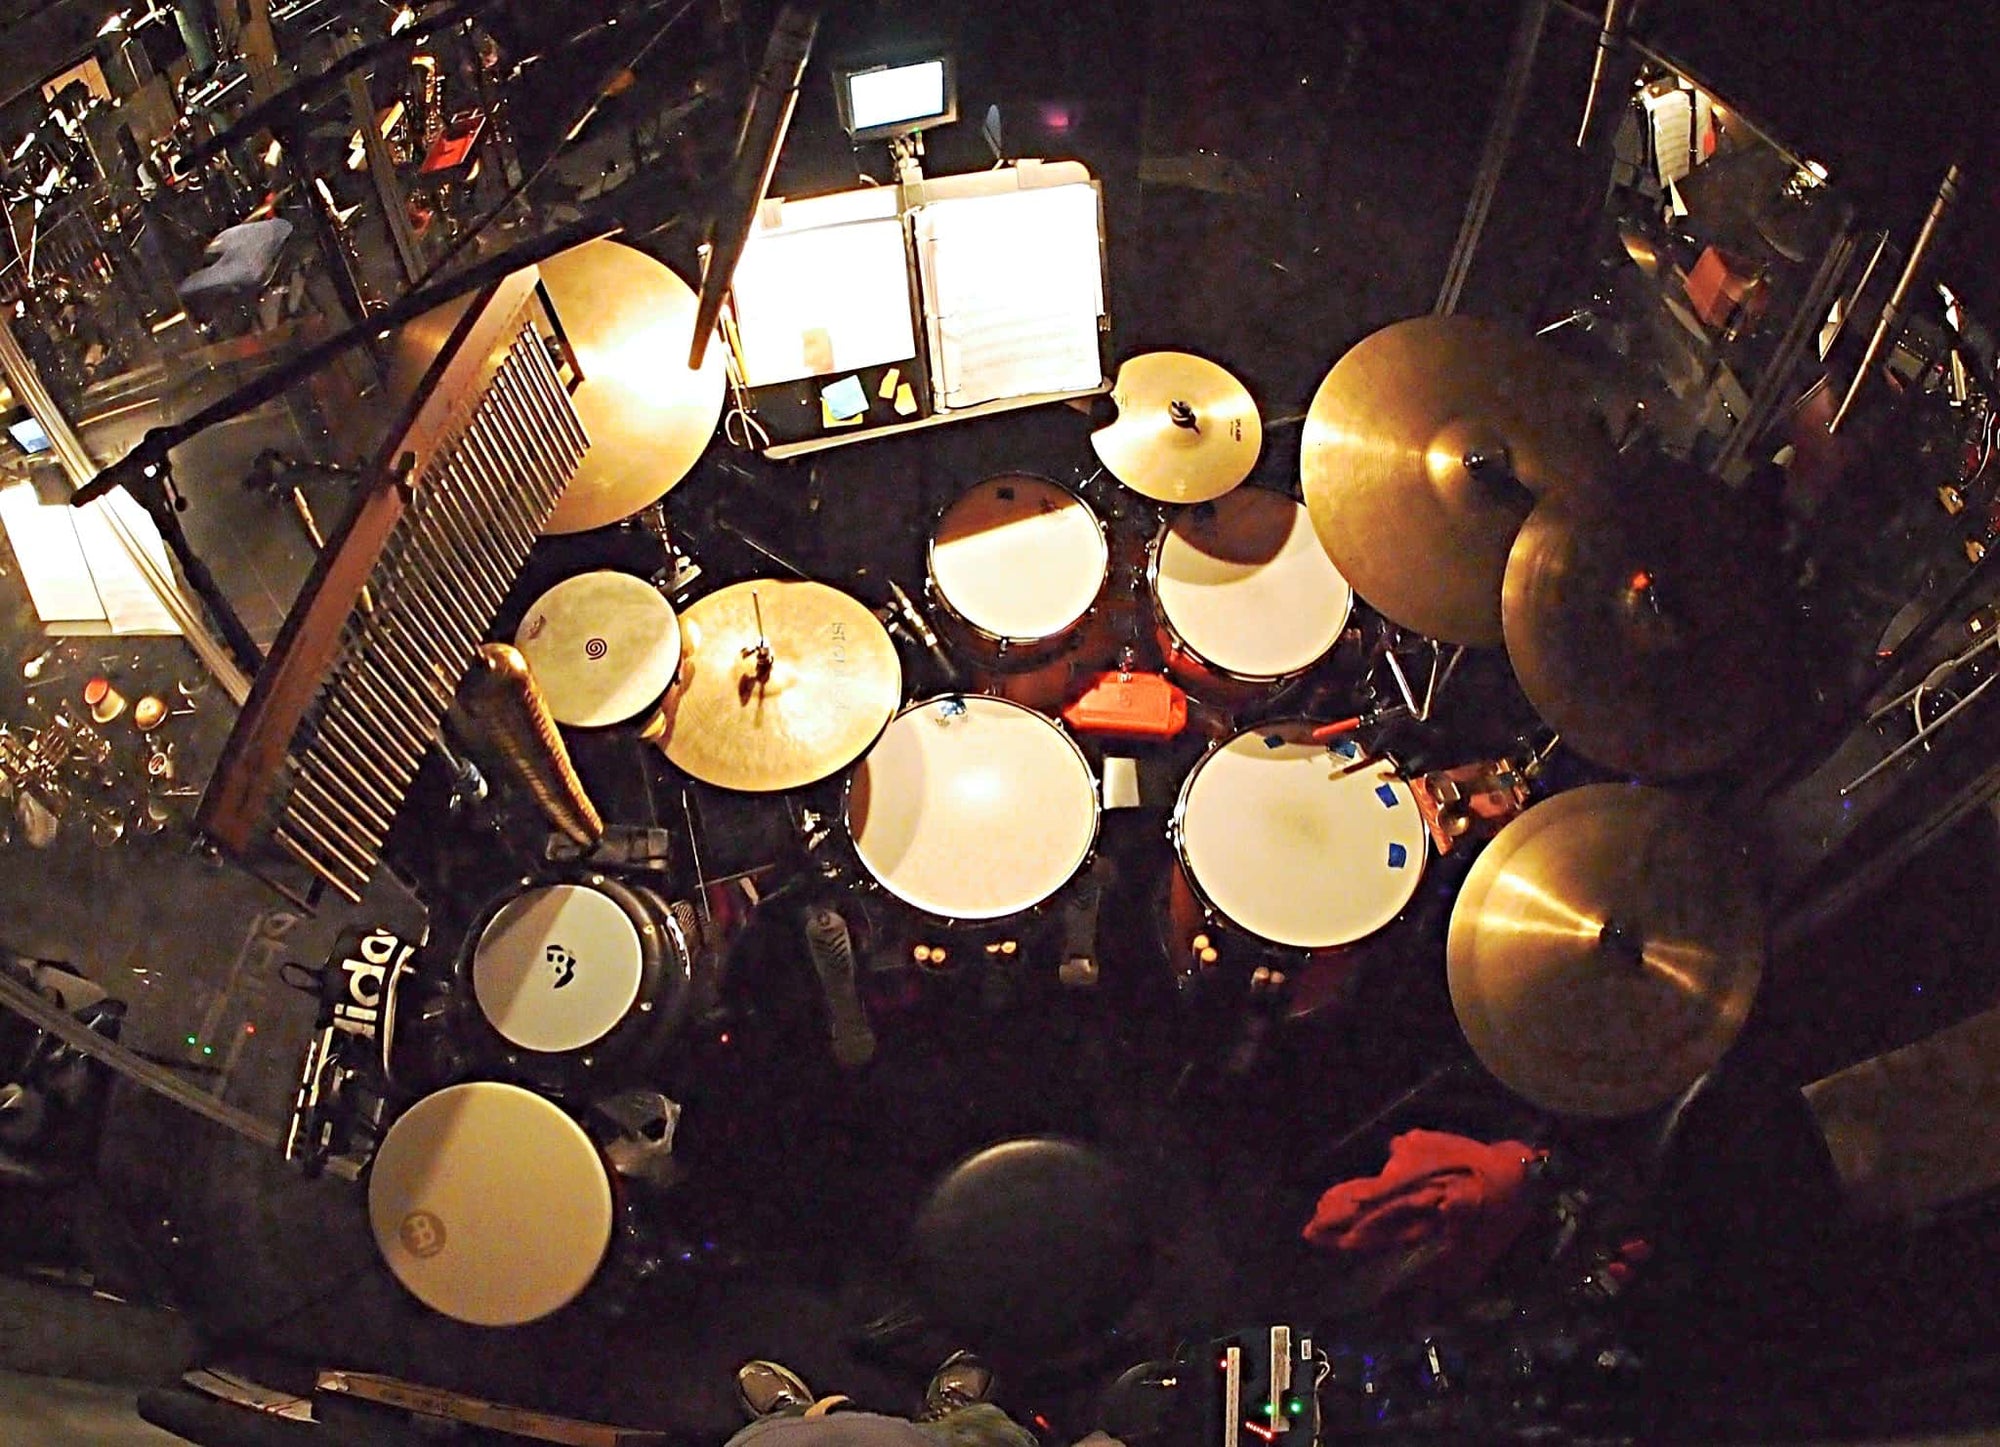 John Redsecker’s drum set setup for the Broadway production of Aladdin at the New Amsterdam Theatre.